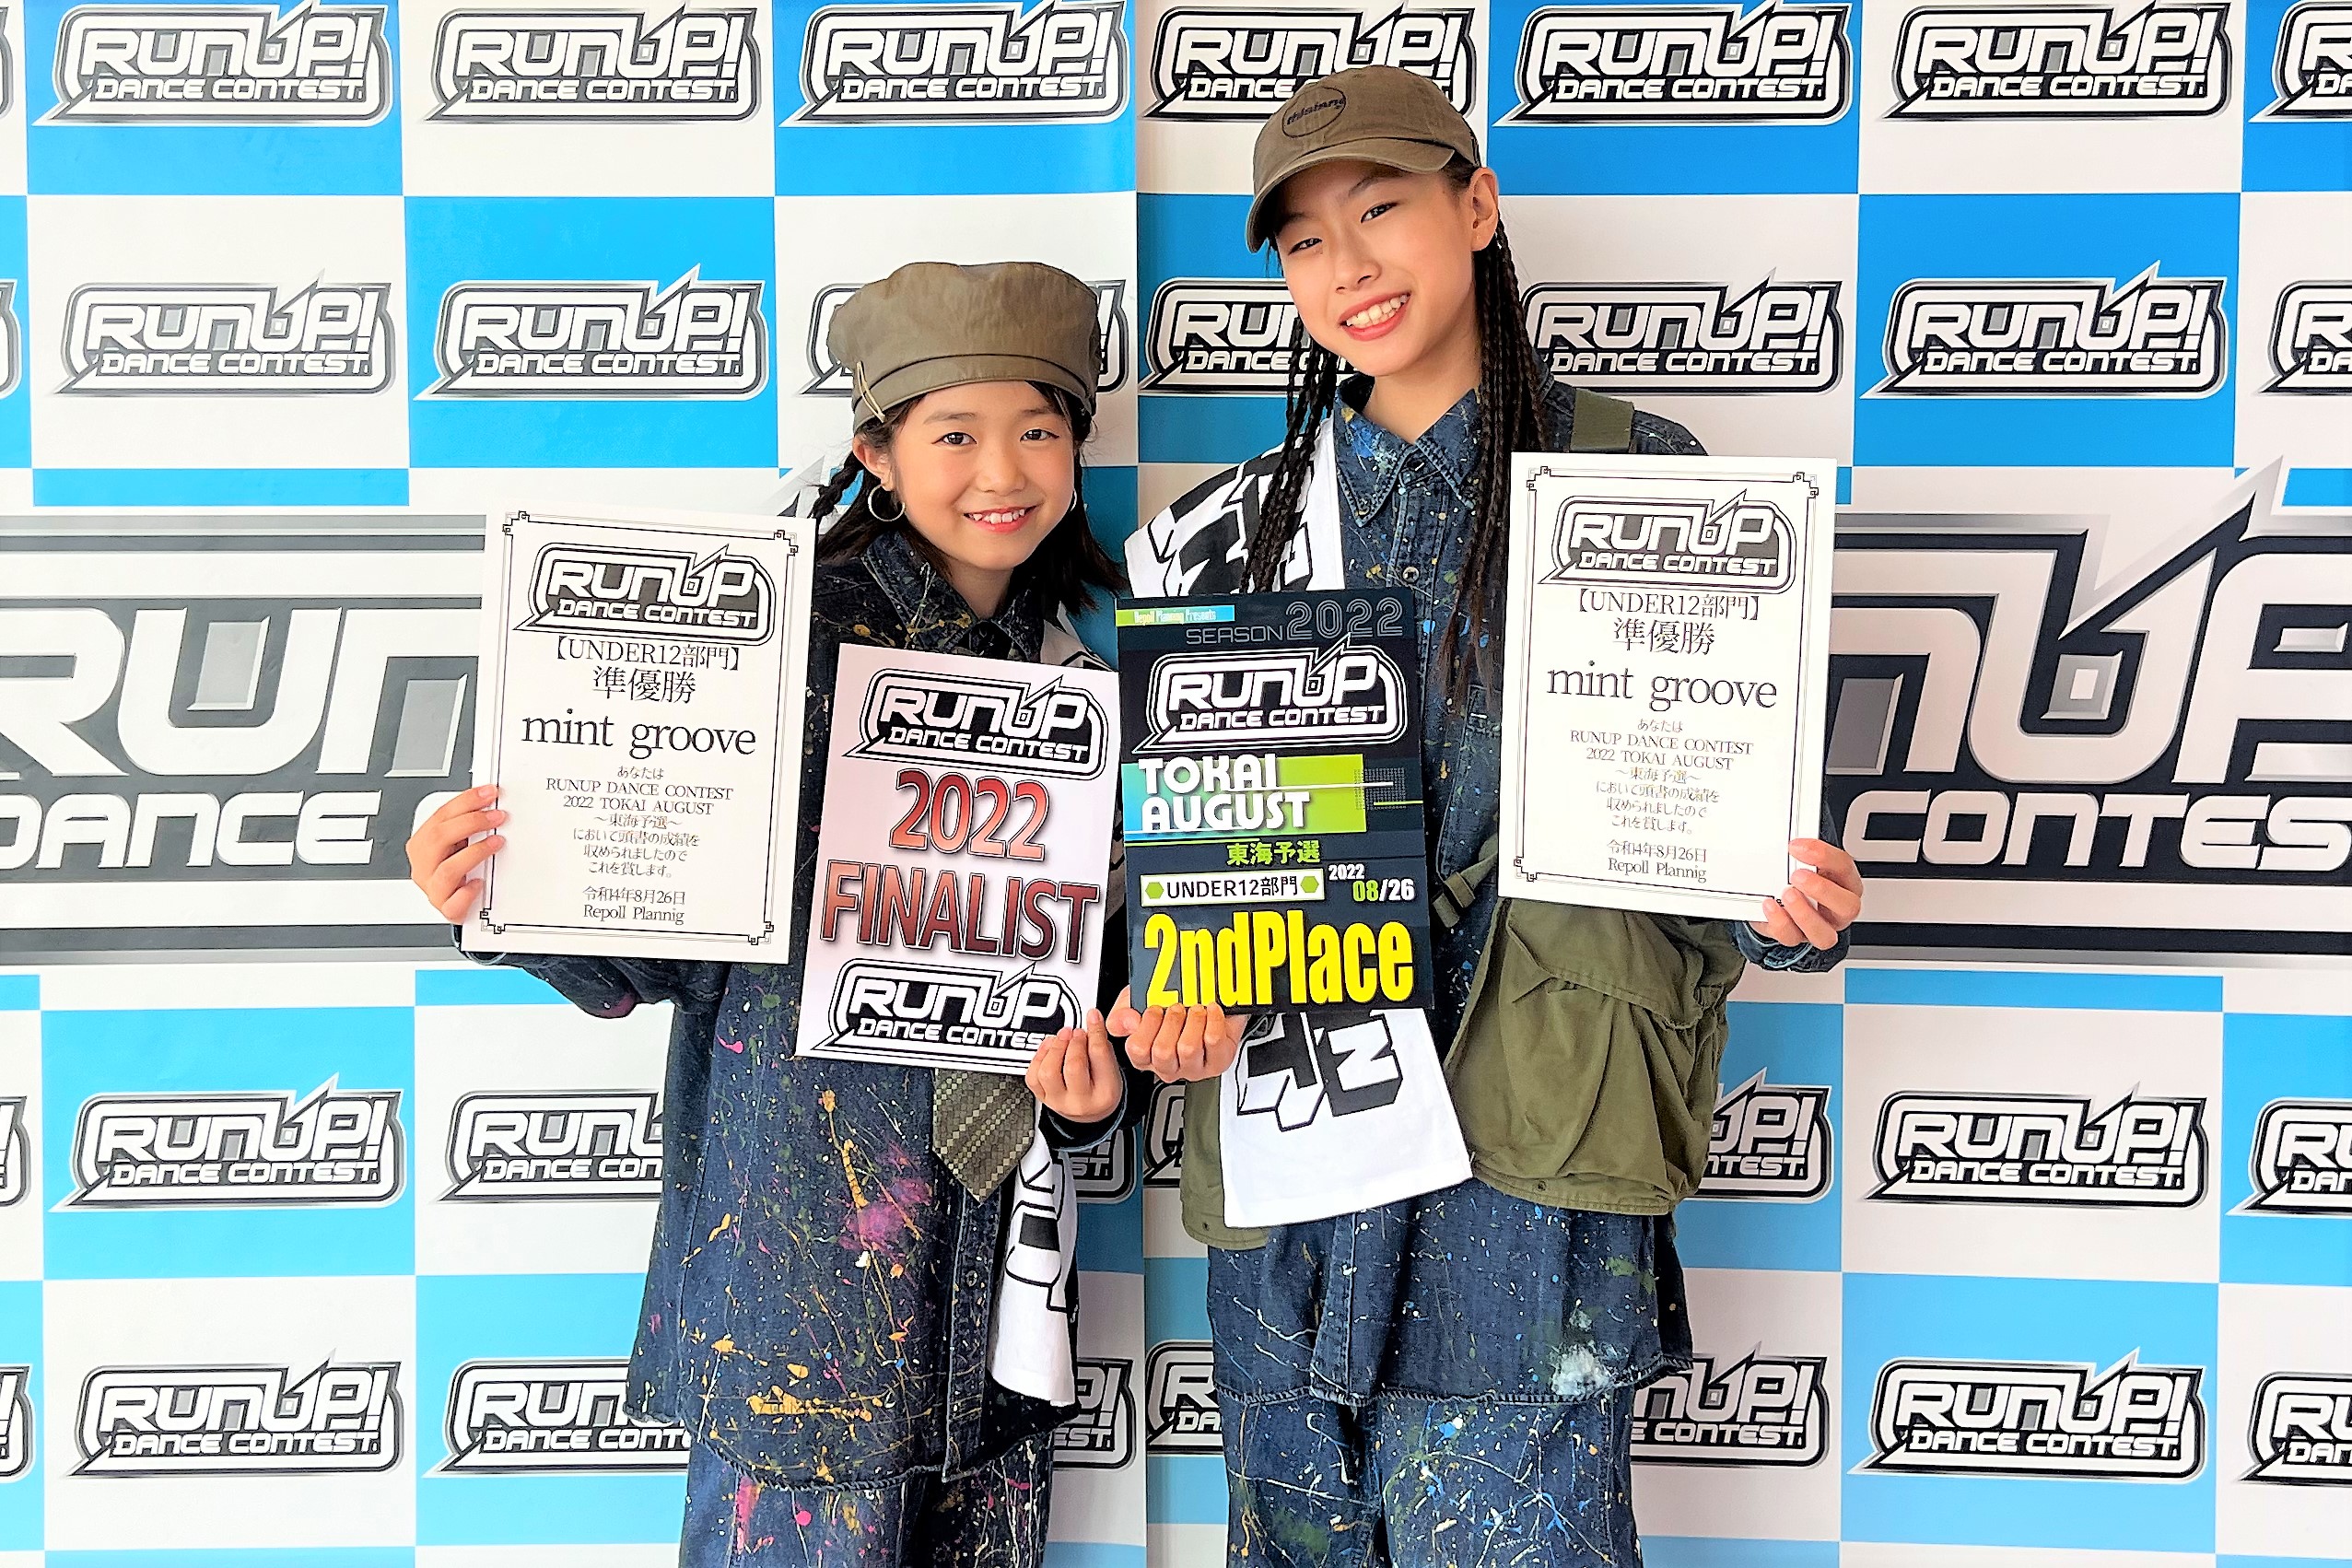 RUNUP 2022 TOKAI AUGUST UNDER12 準優勝 mint groove